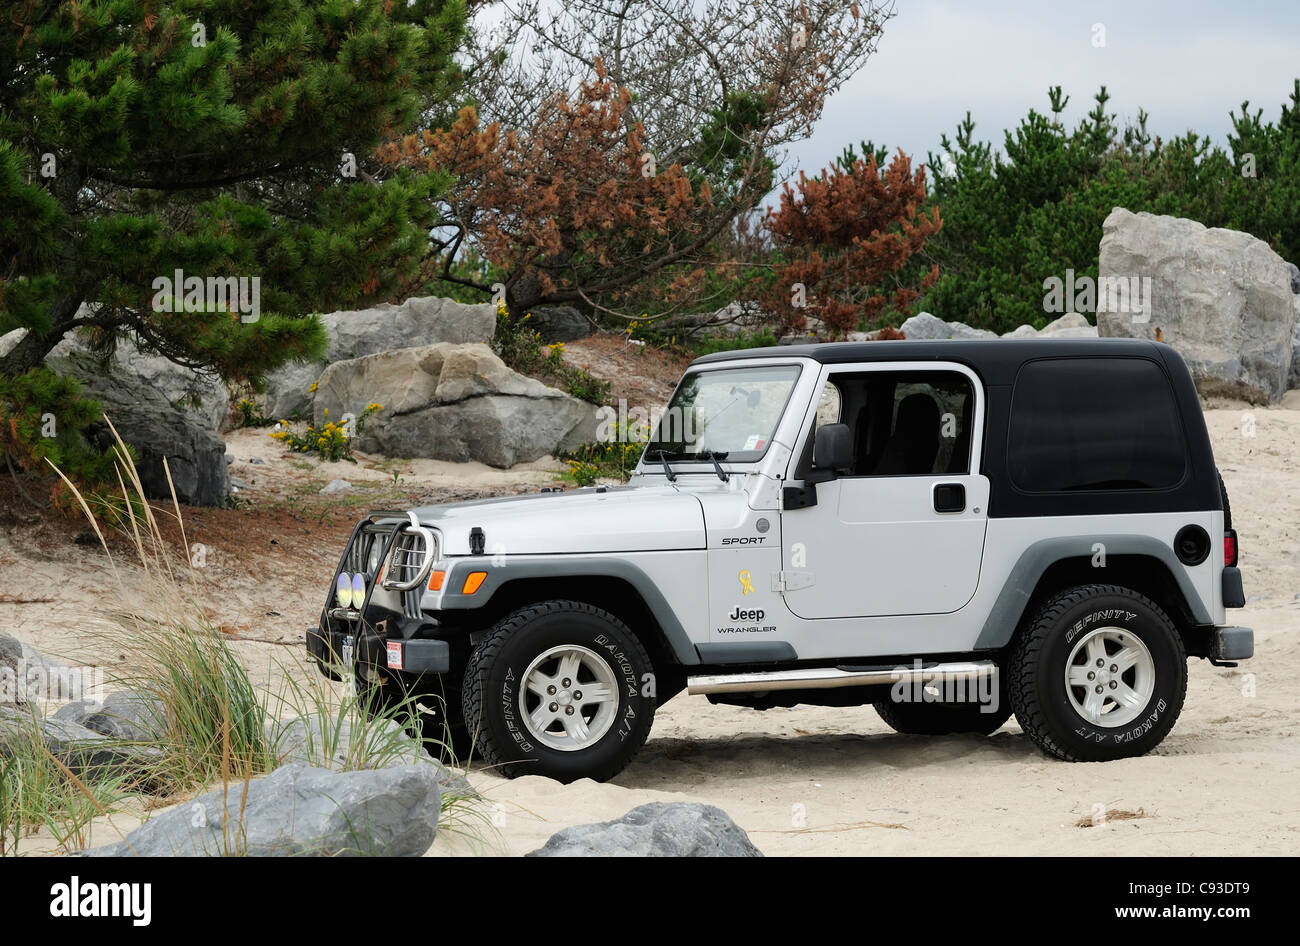 Jeep Wrangler on the beach in the Moriches inlet, Long Island, NY Stock Photo